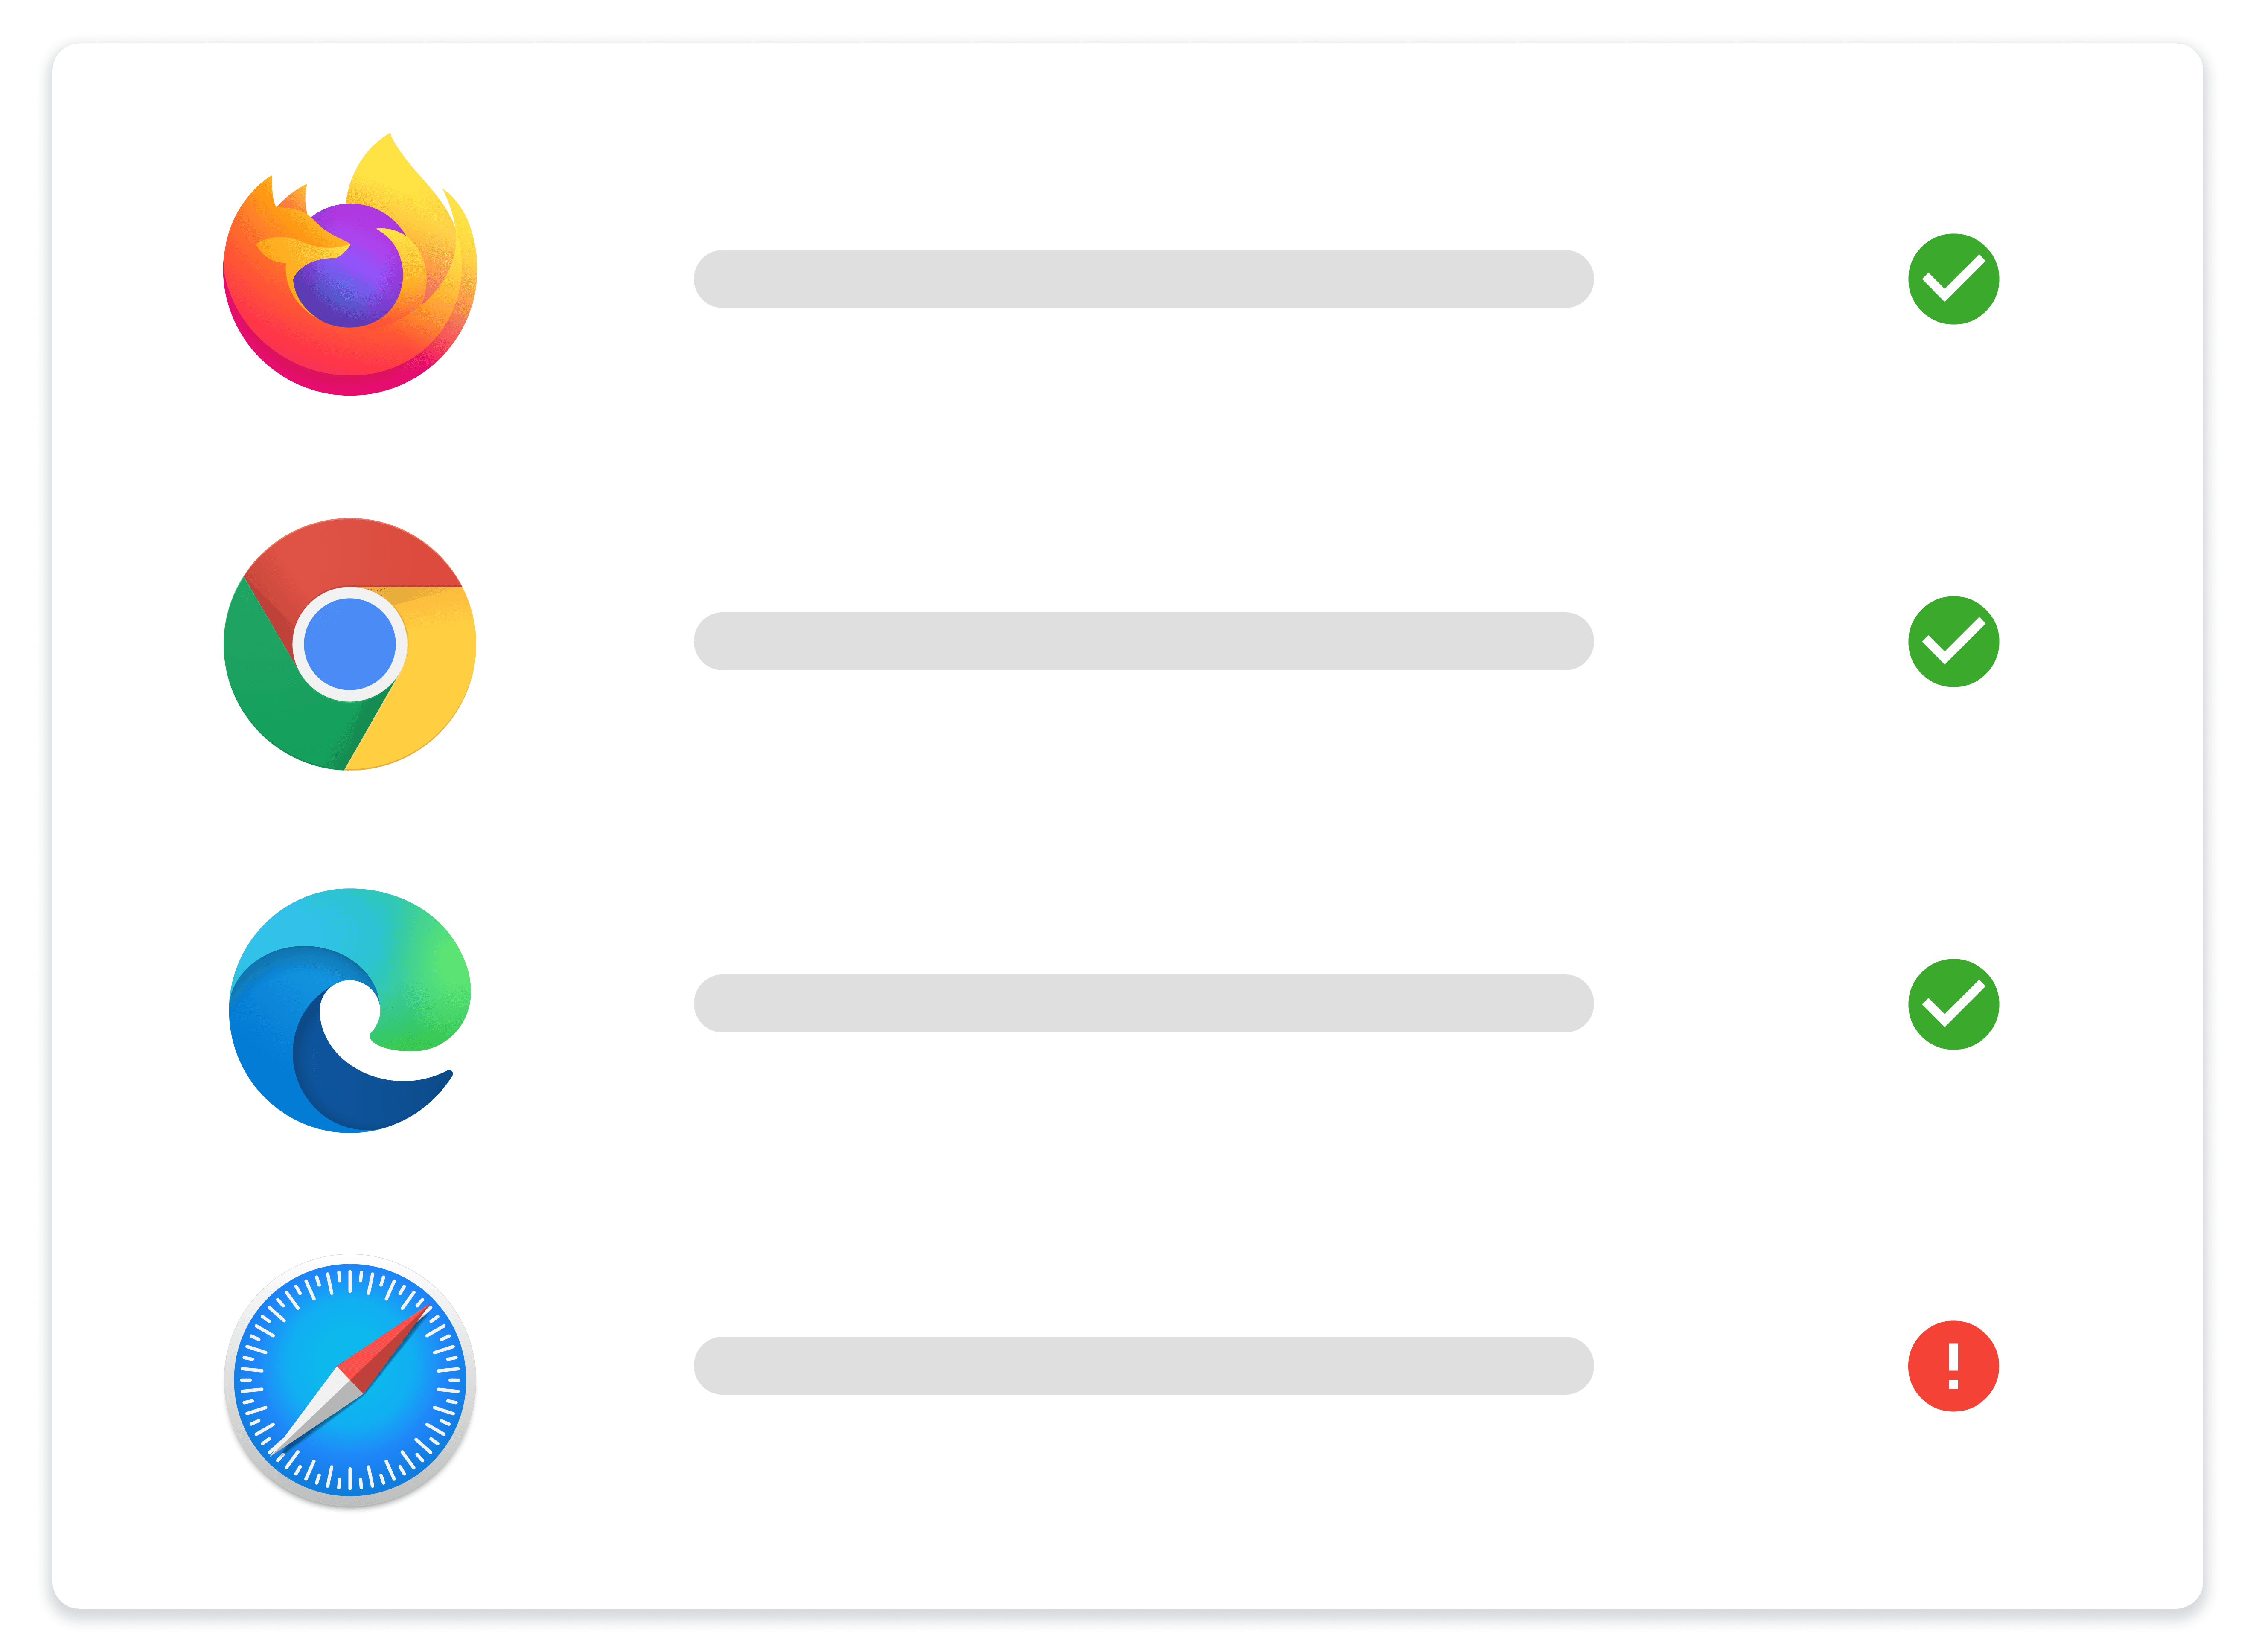 LCT supports Browsers like Edge, Firefox, Safari and Chrome